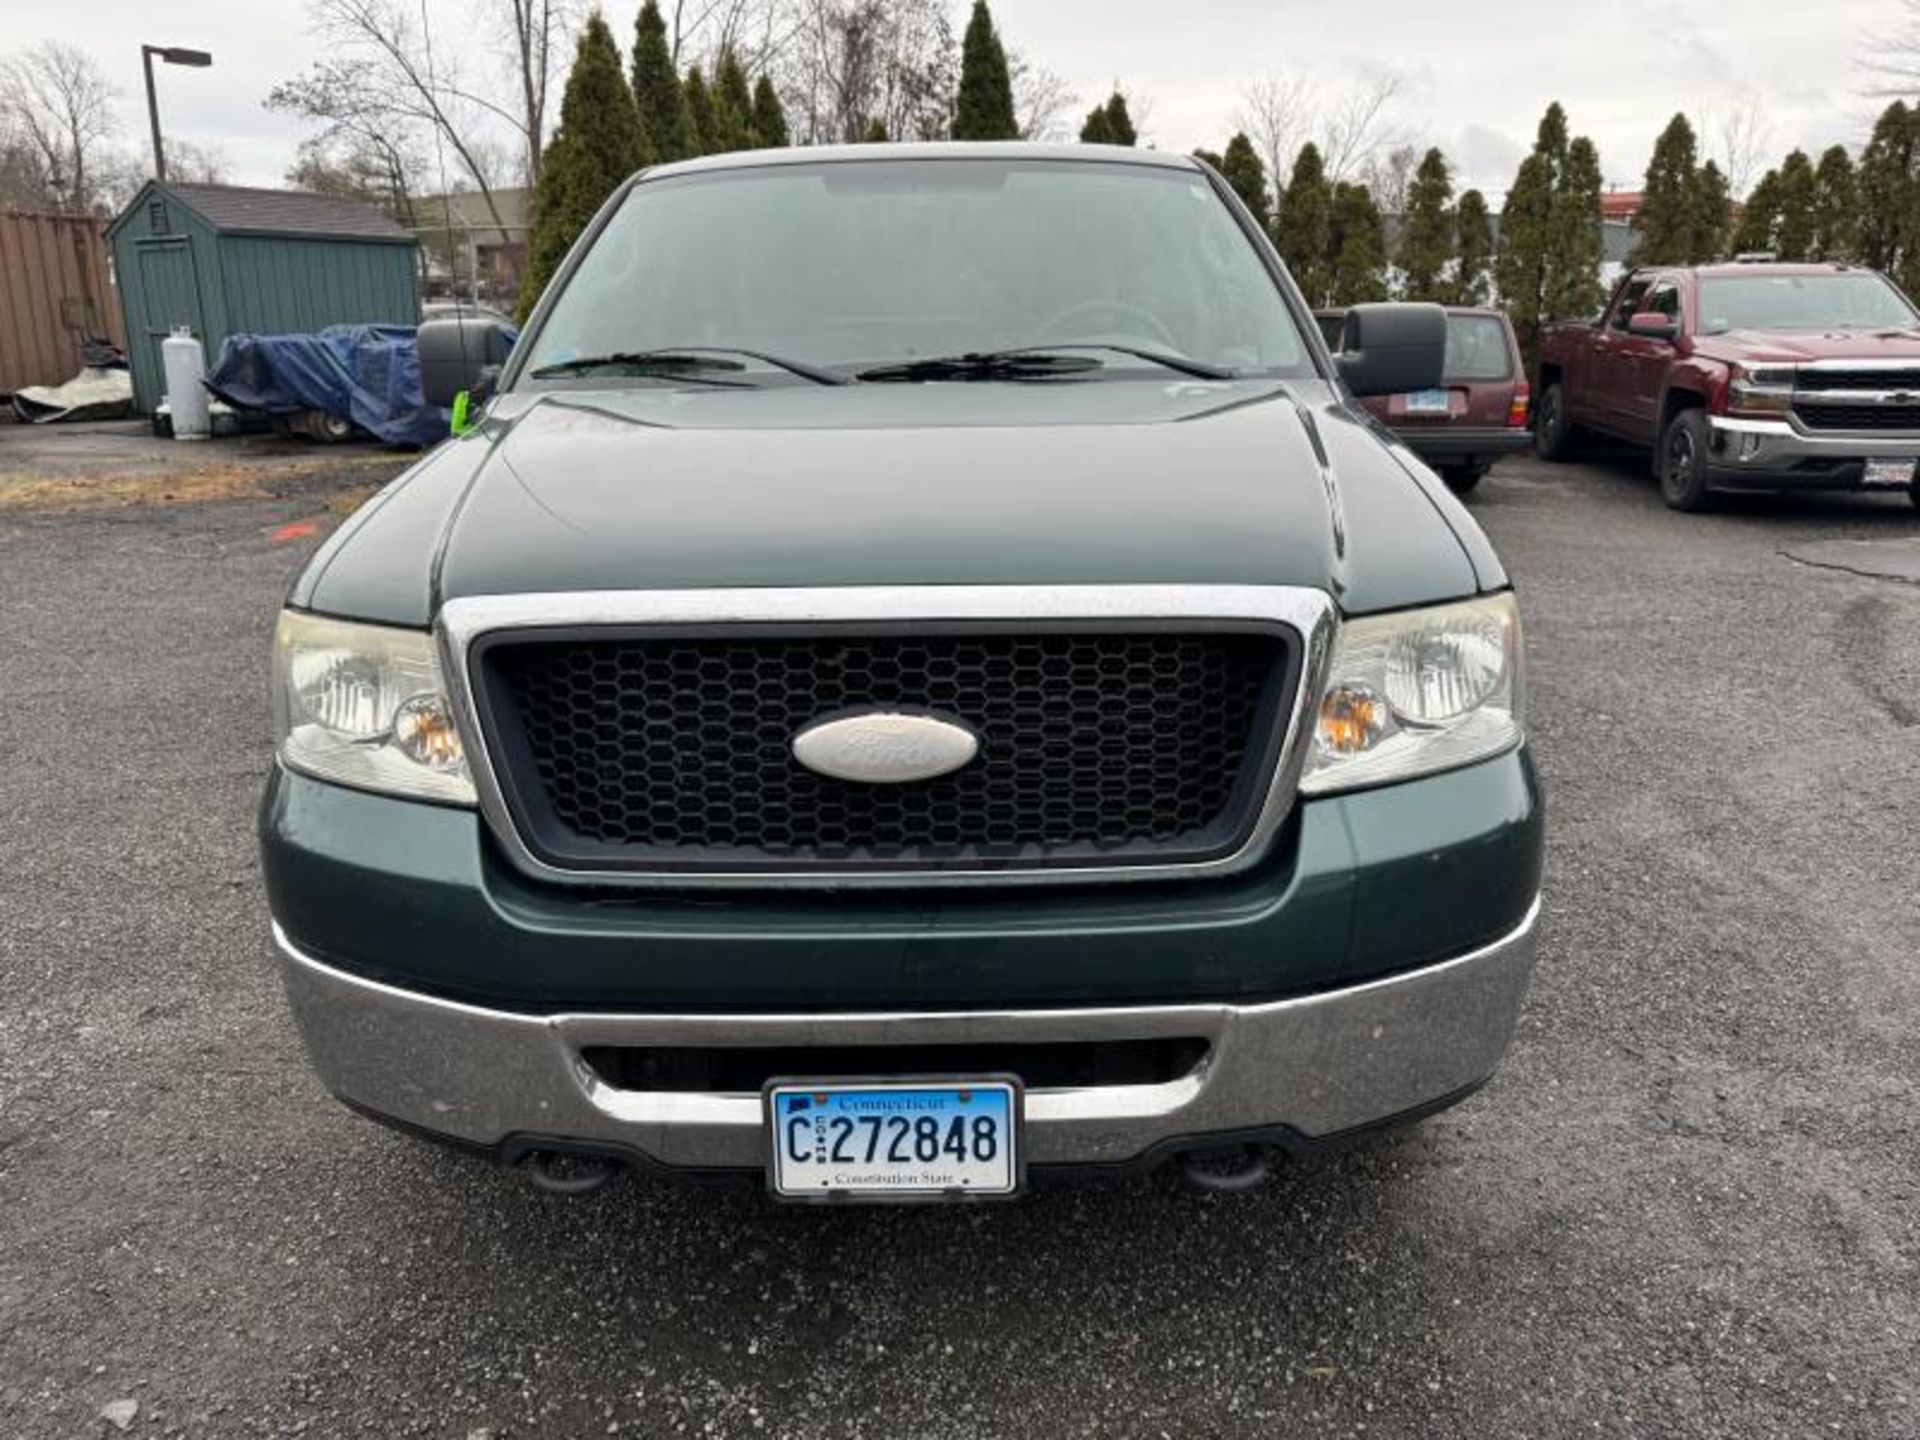 2007 Ford F-150 4x4 Pick Up Truck with 122,621 Mil 2007 Ford F-150 4x4 Pick Up Truck with 122,621 Mi - Image 11 of 11